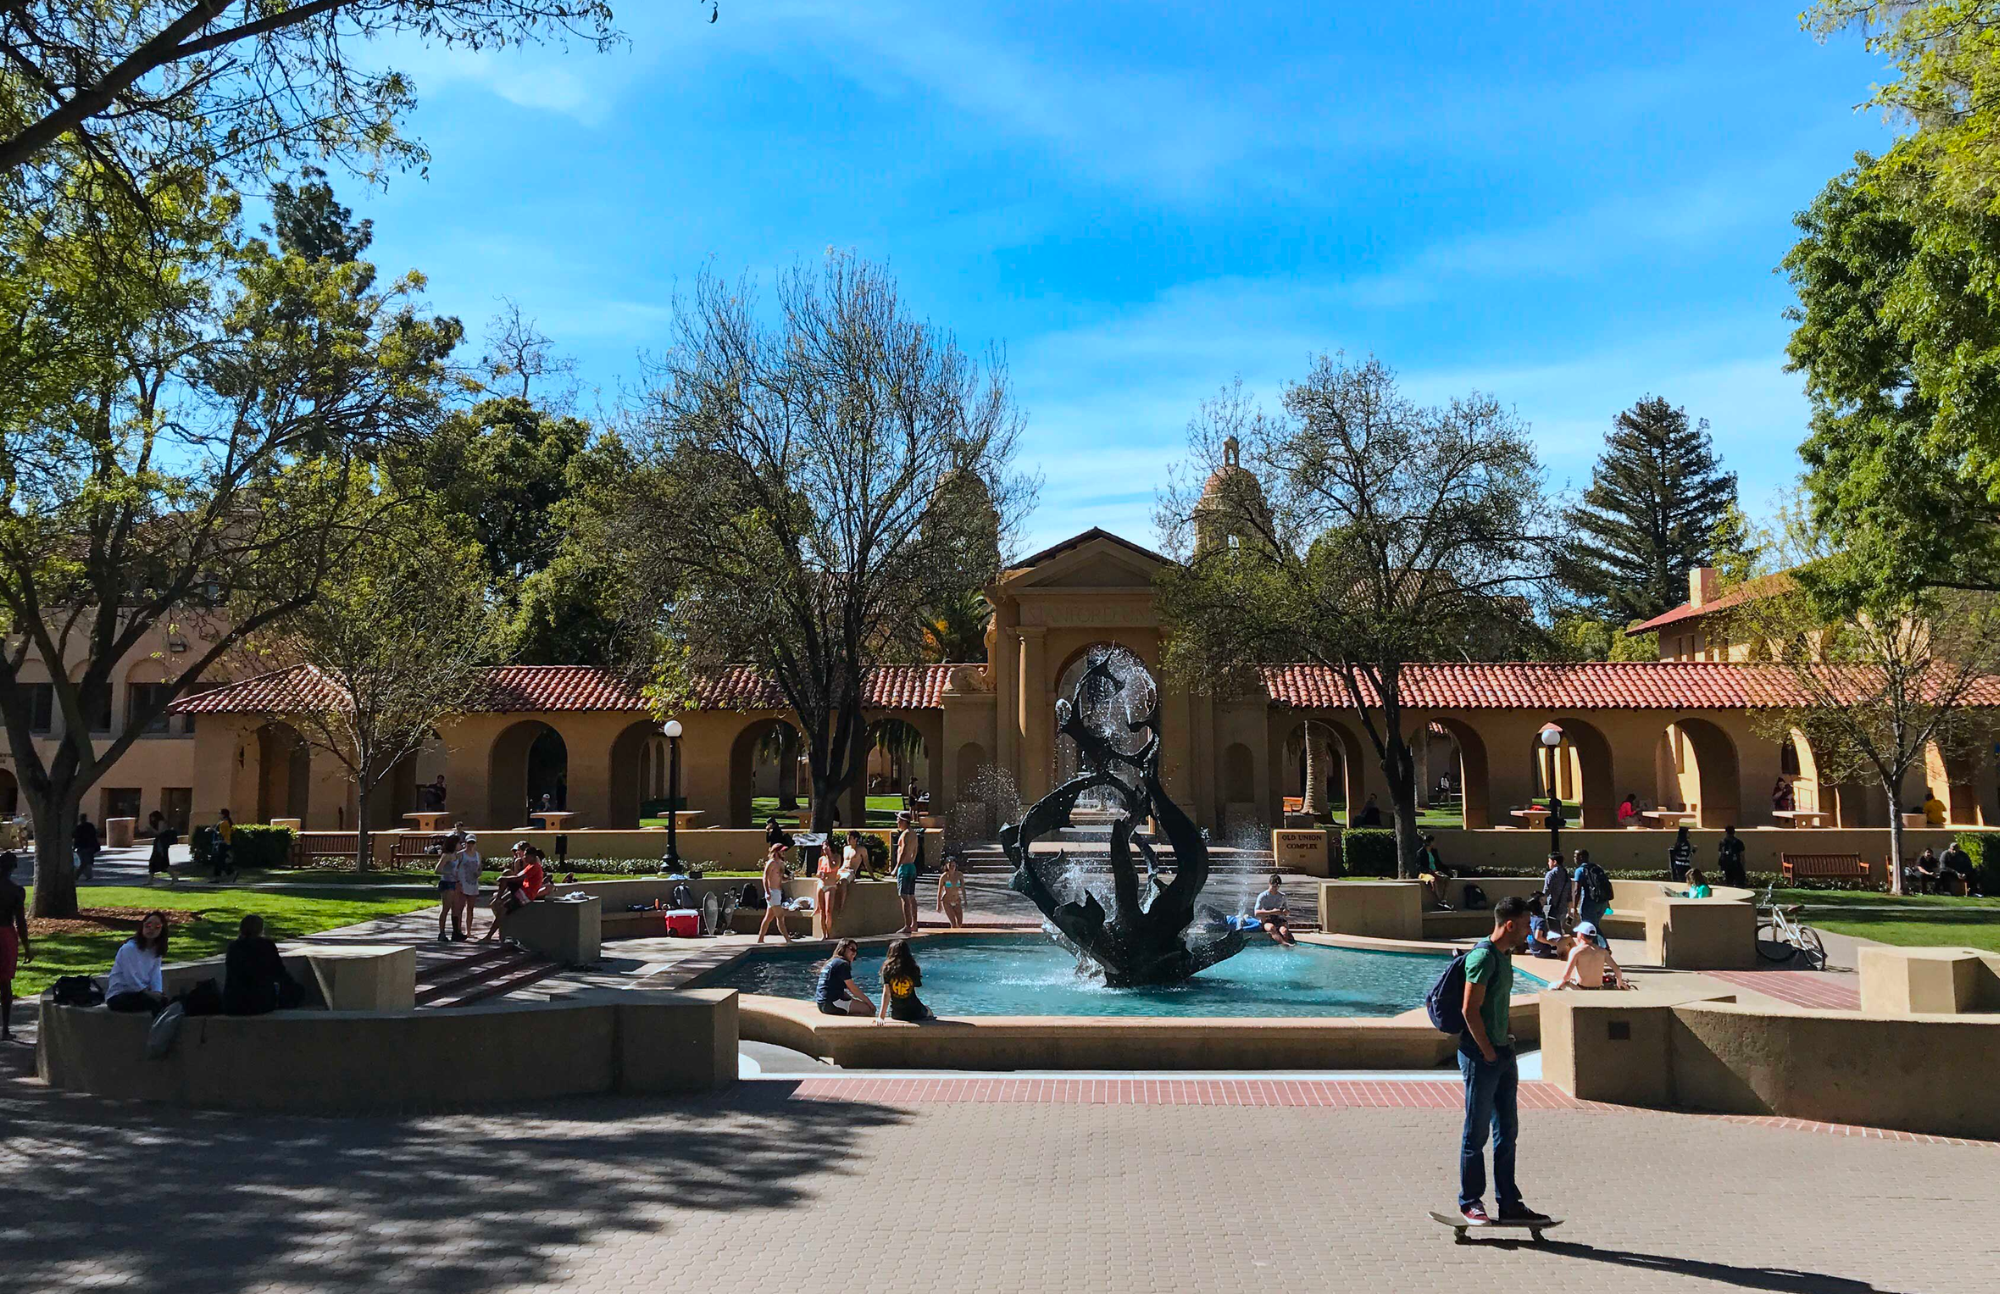 Water feature and courtyard at Stanford's White Plaza